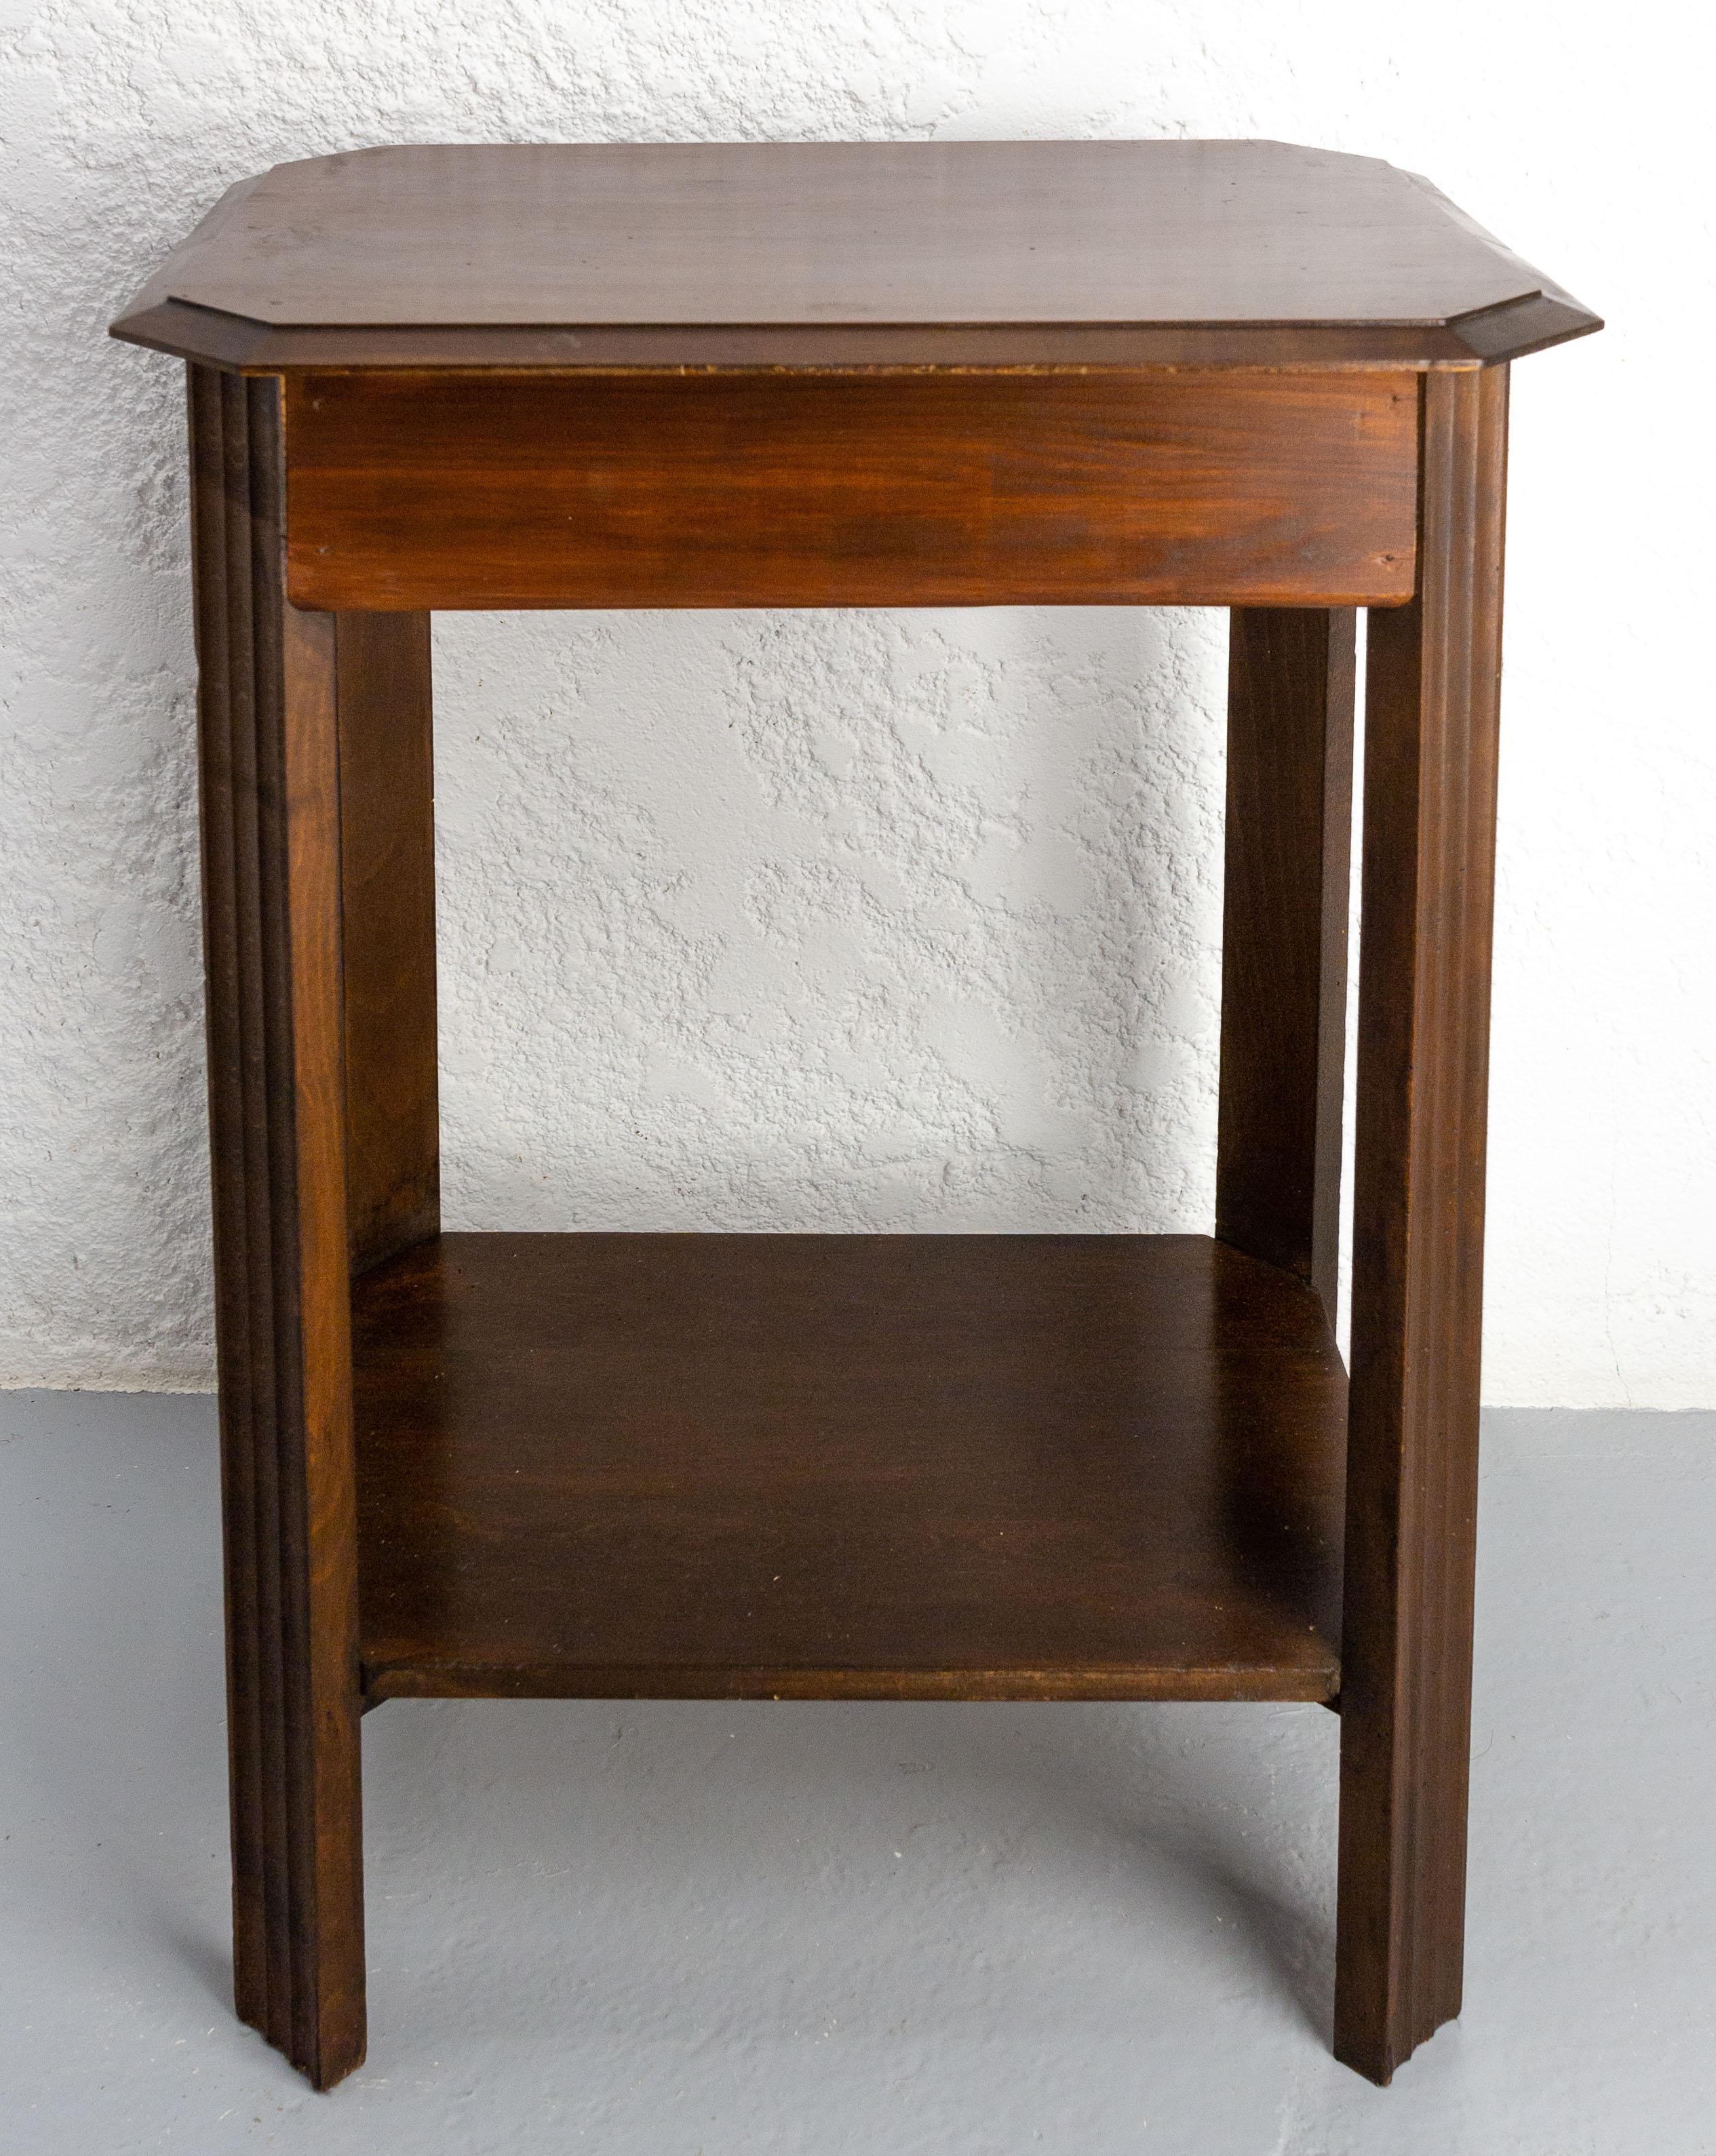 French Poplar Side Table Sellette or Nightstand Art Deco, circa 1930 For Sale 5